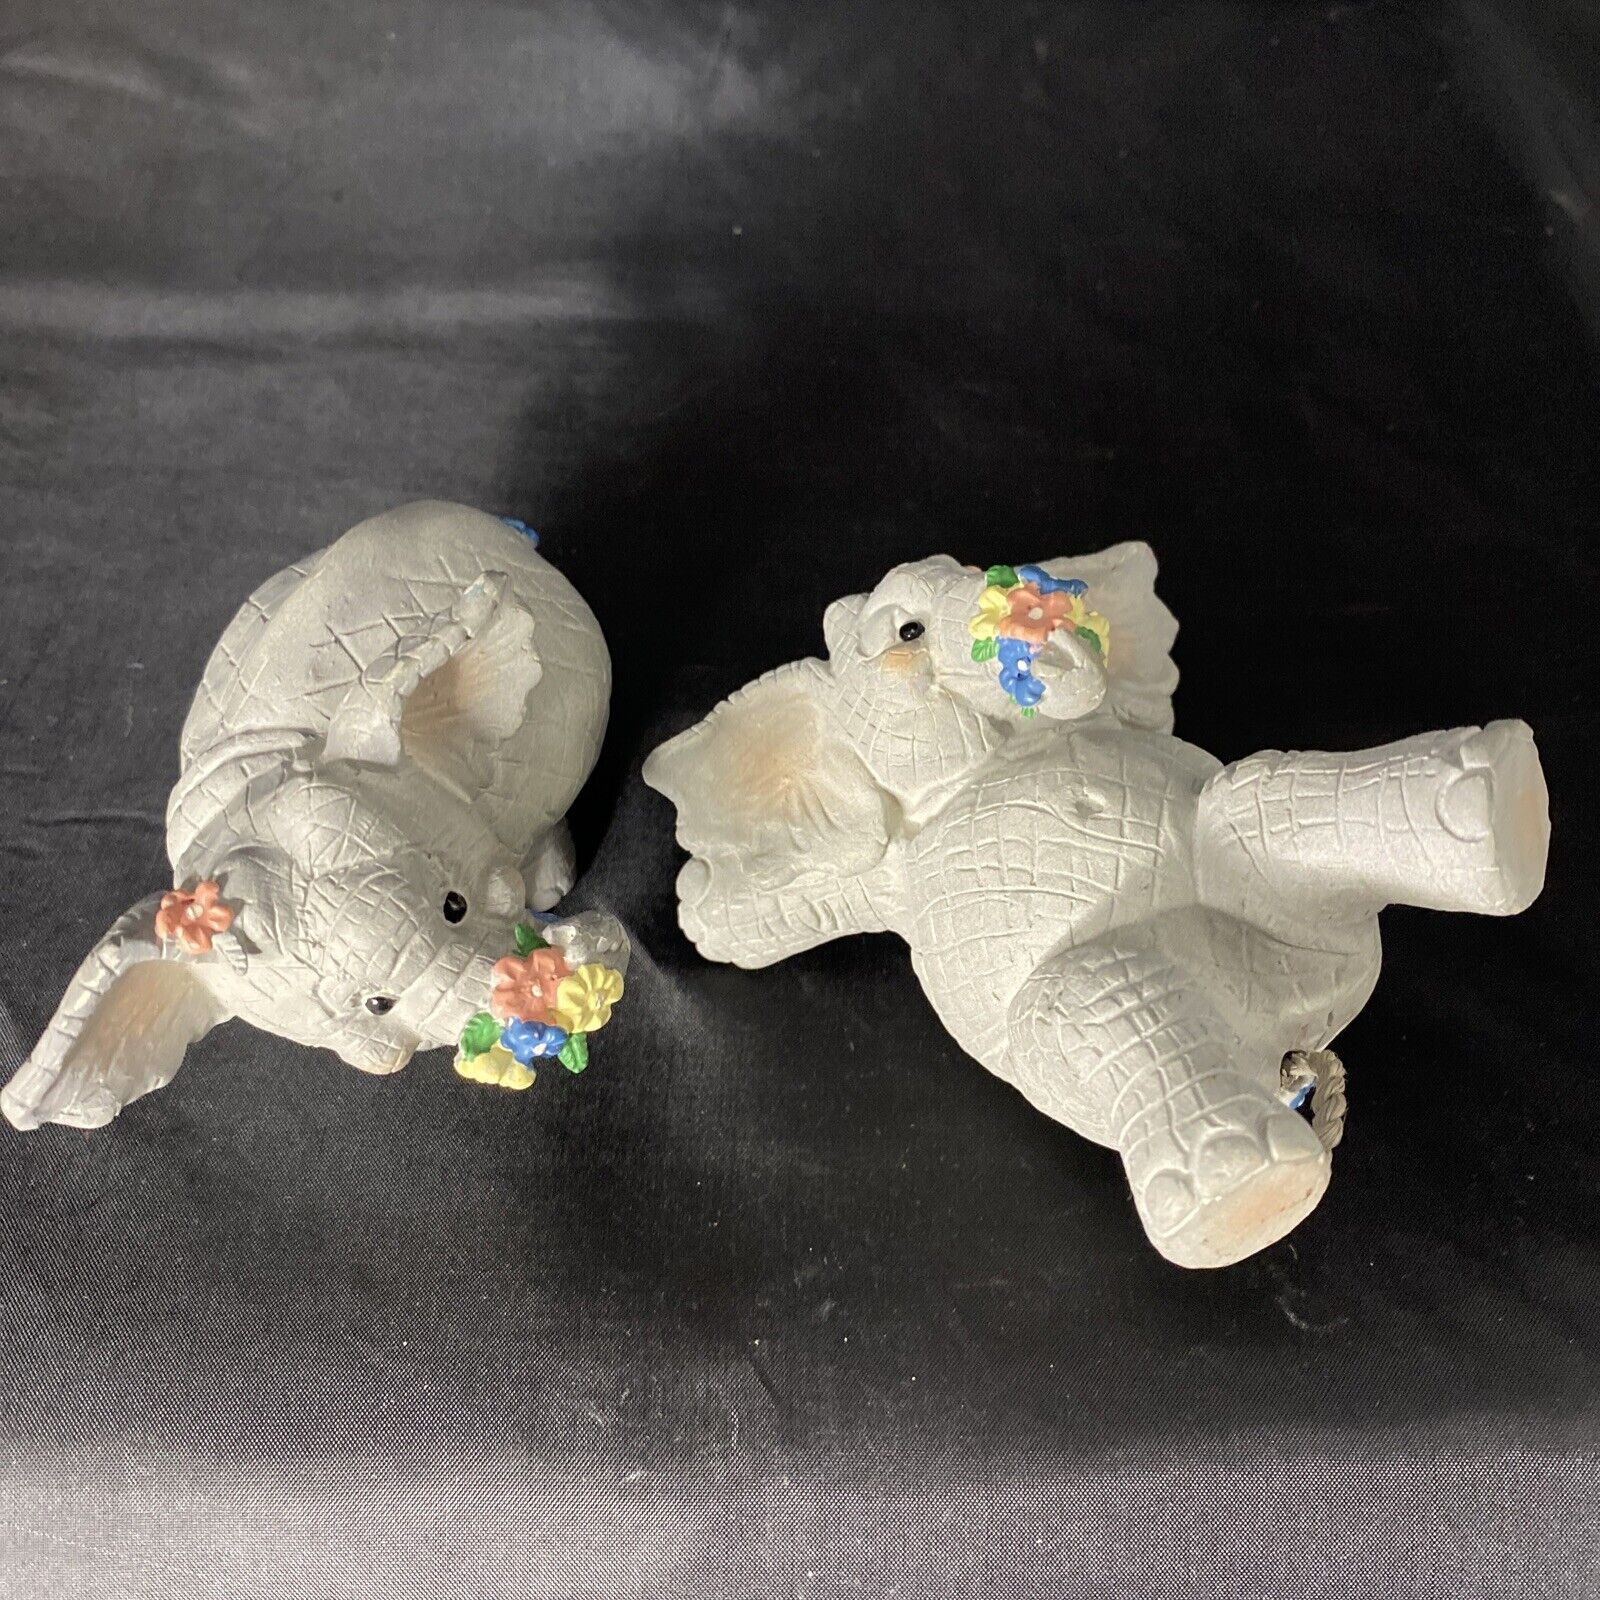 Vintage 1996 Enesco Resin Elephants With Flowers Kathy Wise Design Lot Of 2